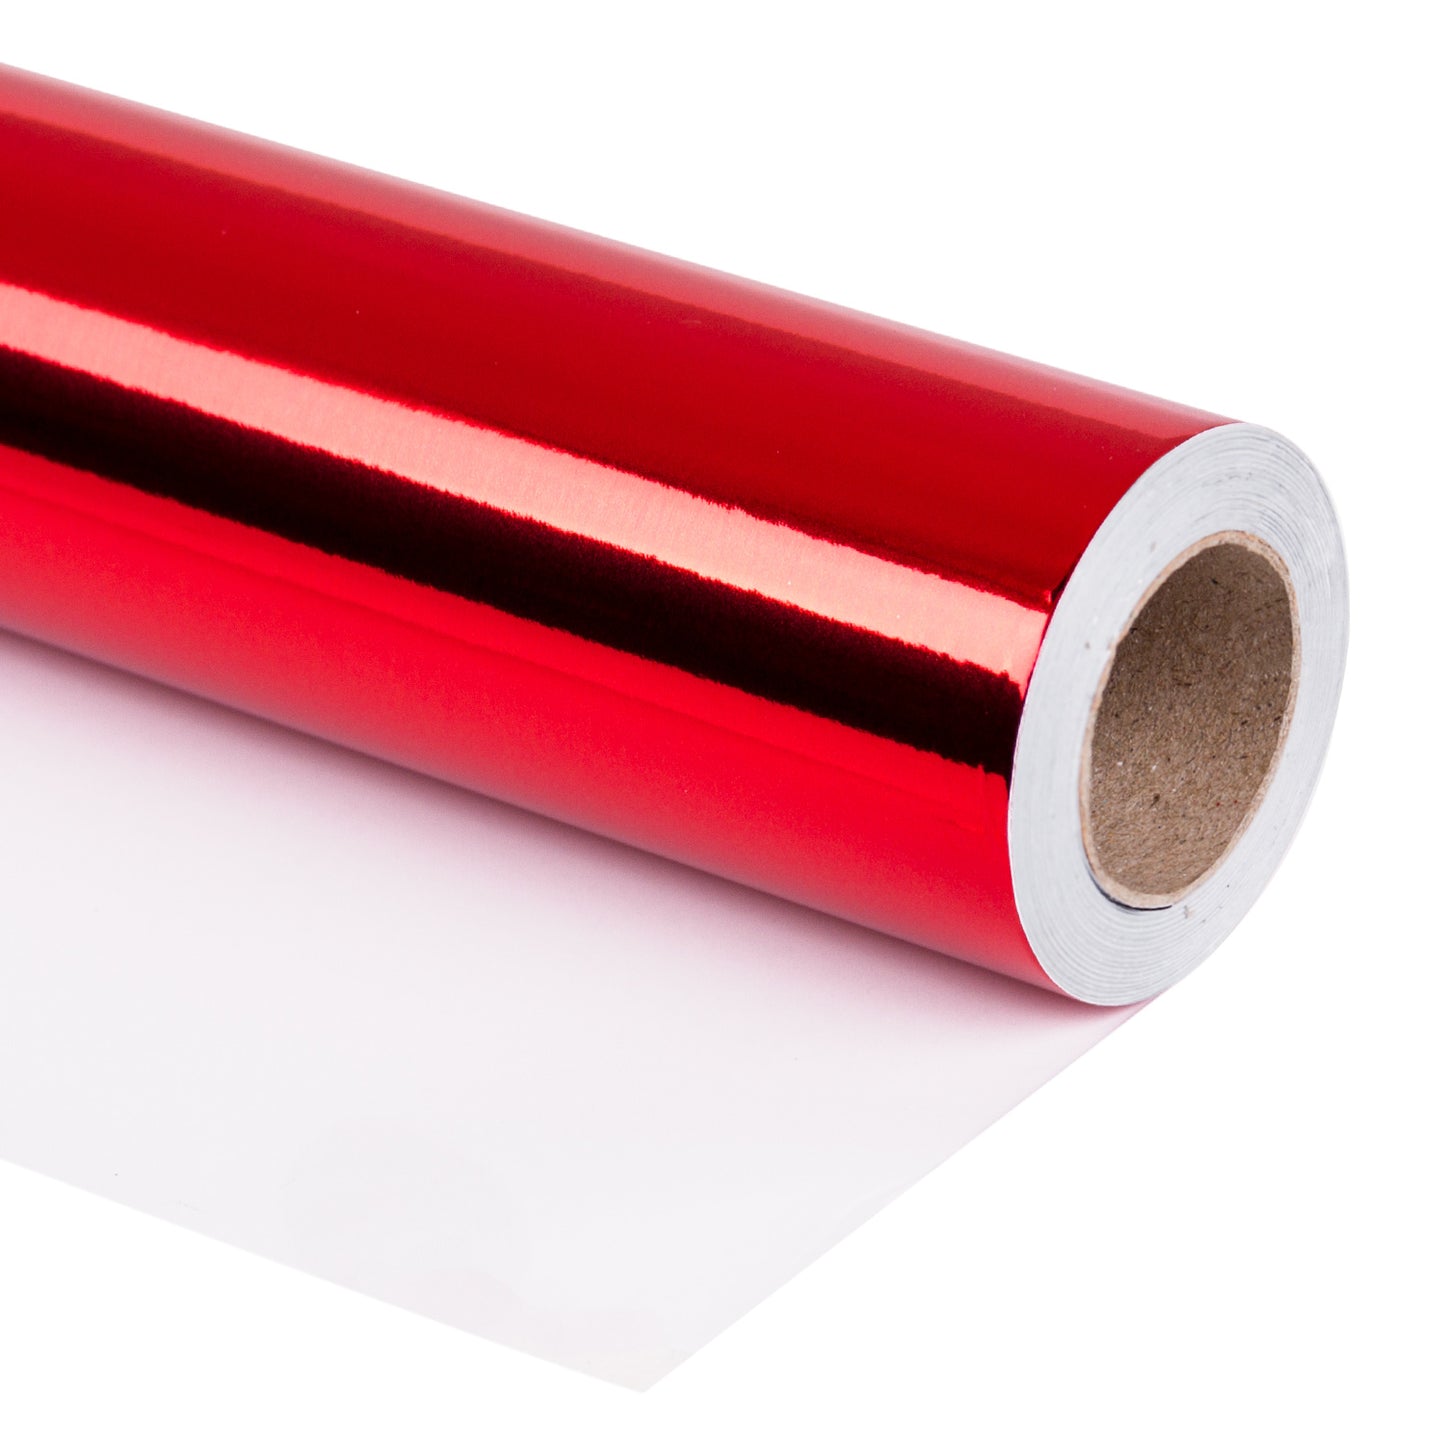 Glossy Metallic Wrapping Paper Roll Red Ream Wholesale Wrapaholic